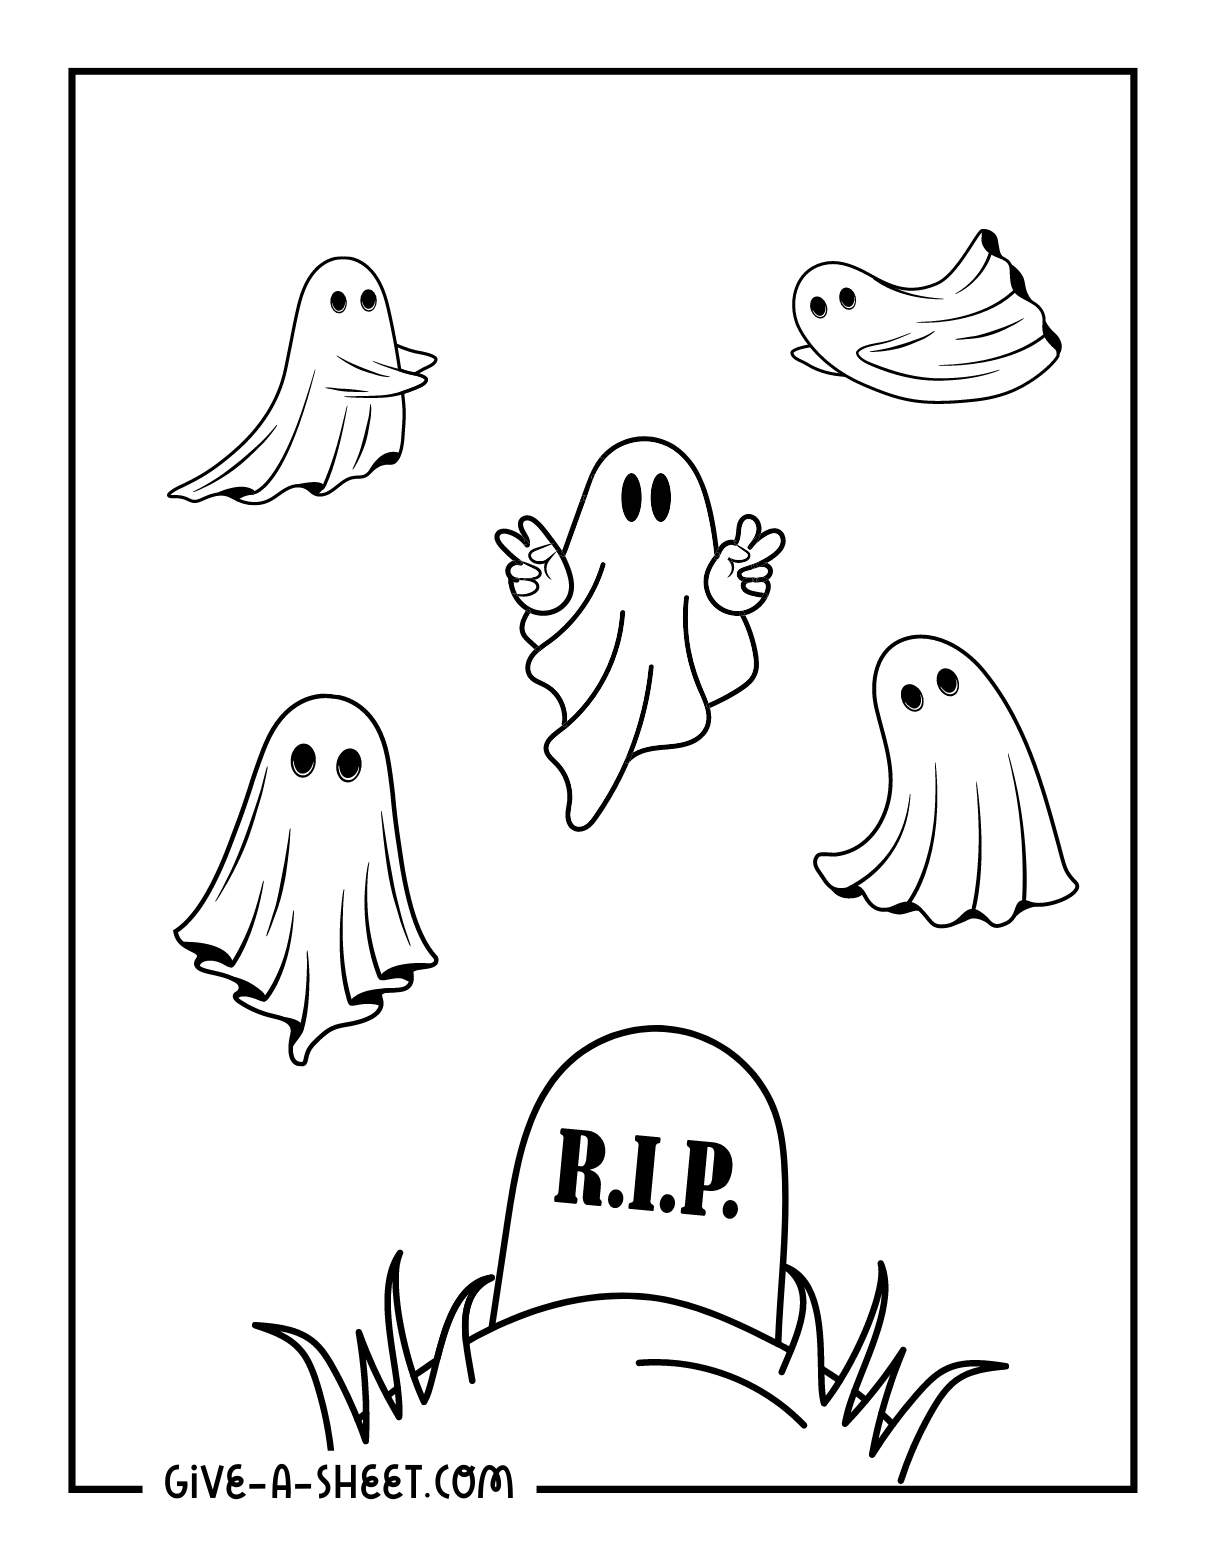 Ghost coloring pages on a graveyard to color.